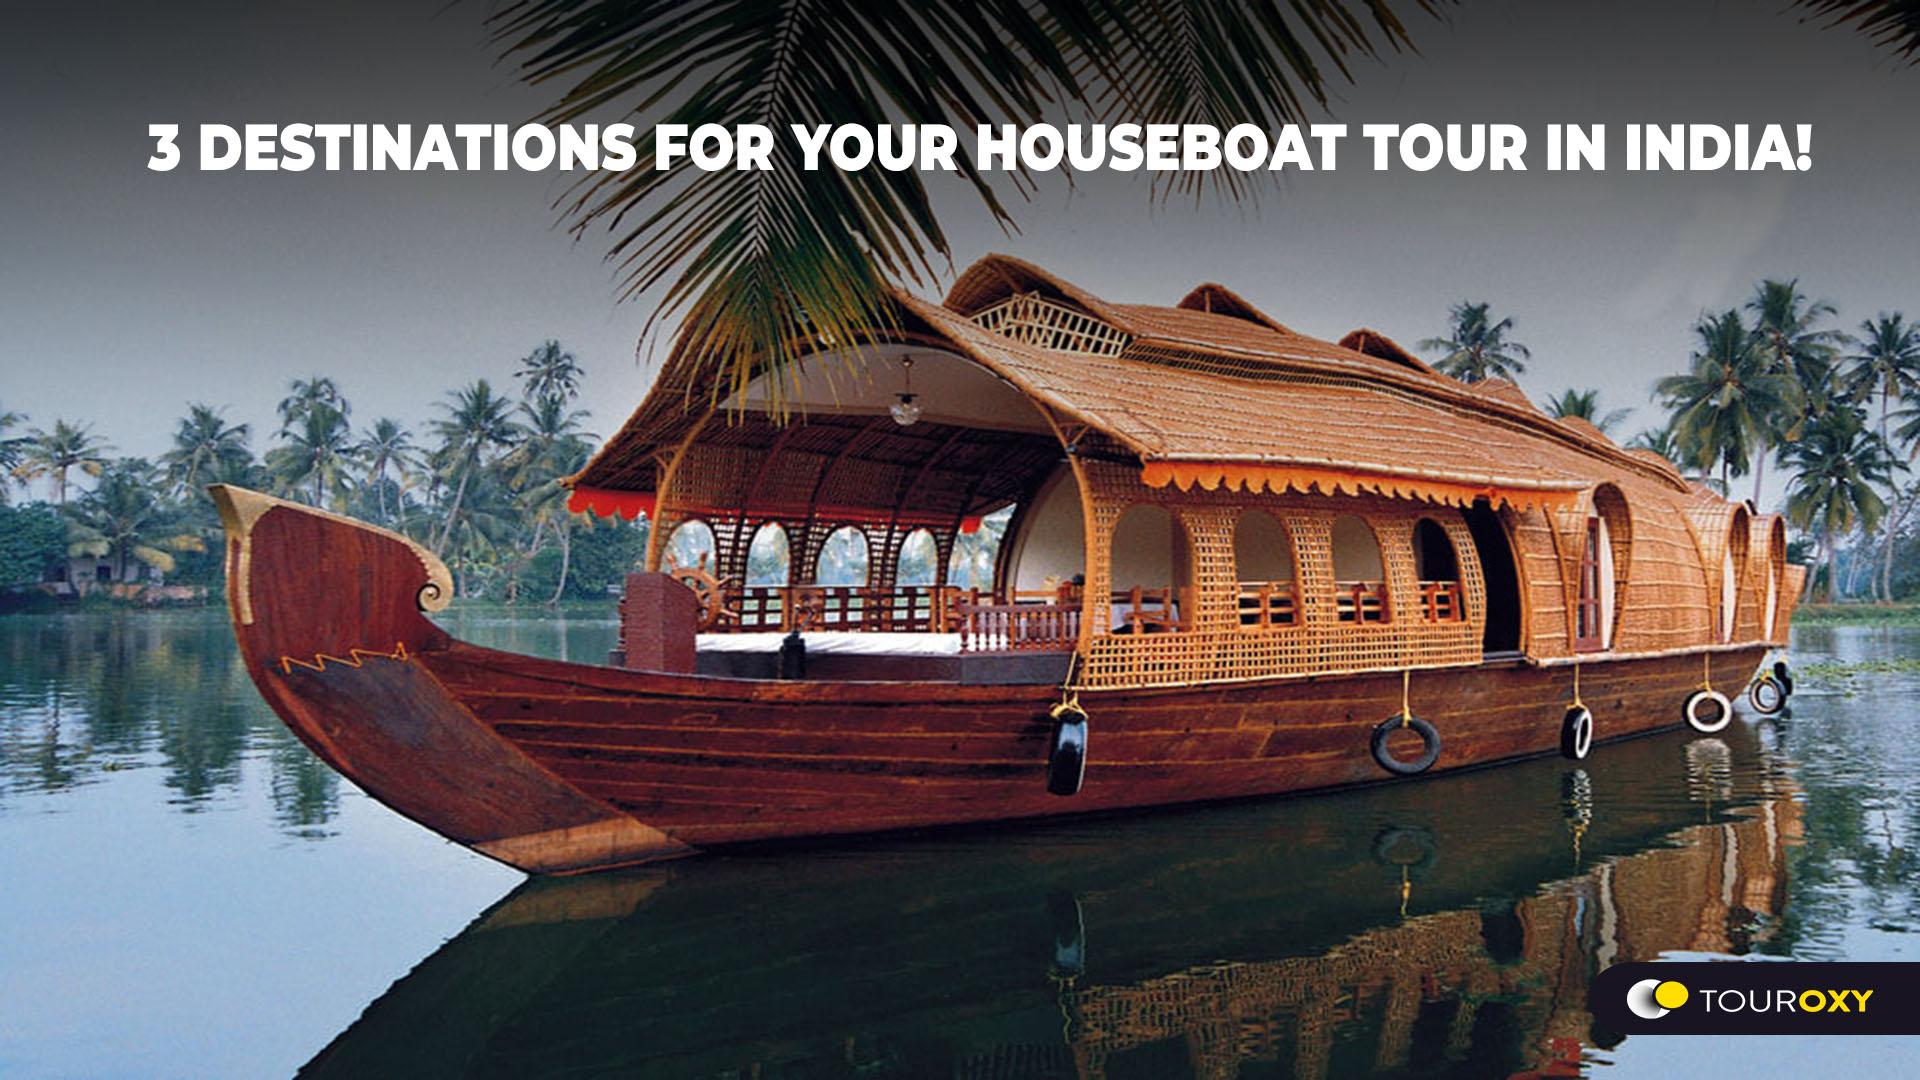 3 DESTINATIONS FOR YOUR HOUSEBOAT TOUR IN INDIA